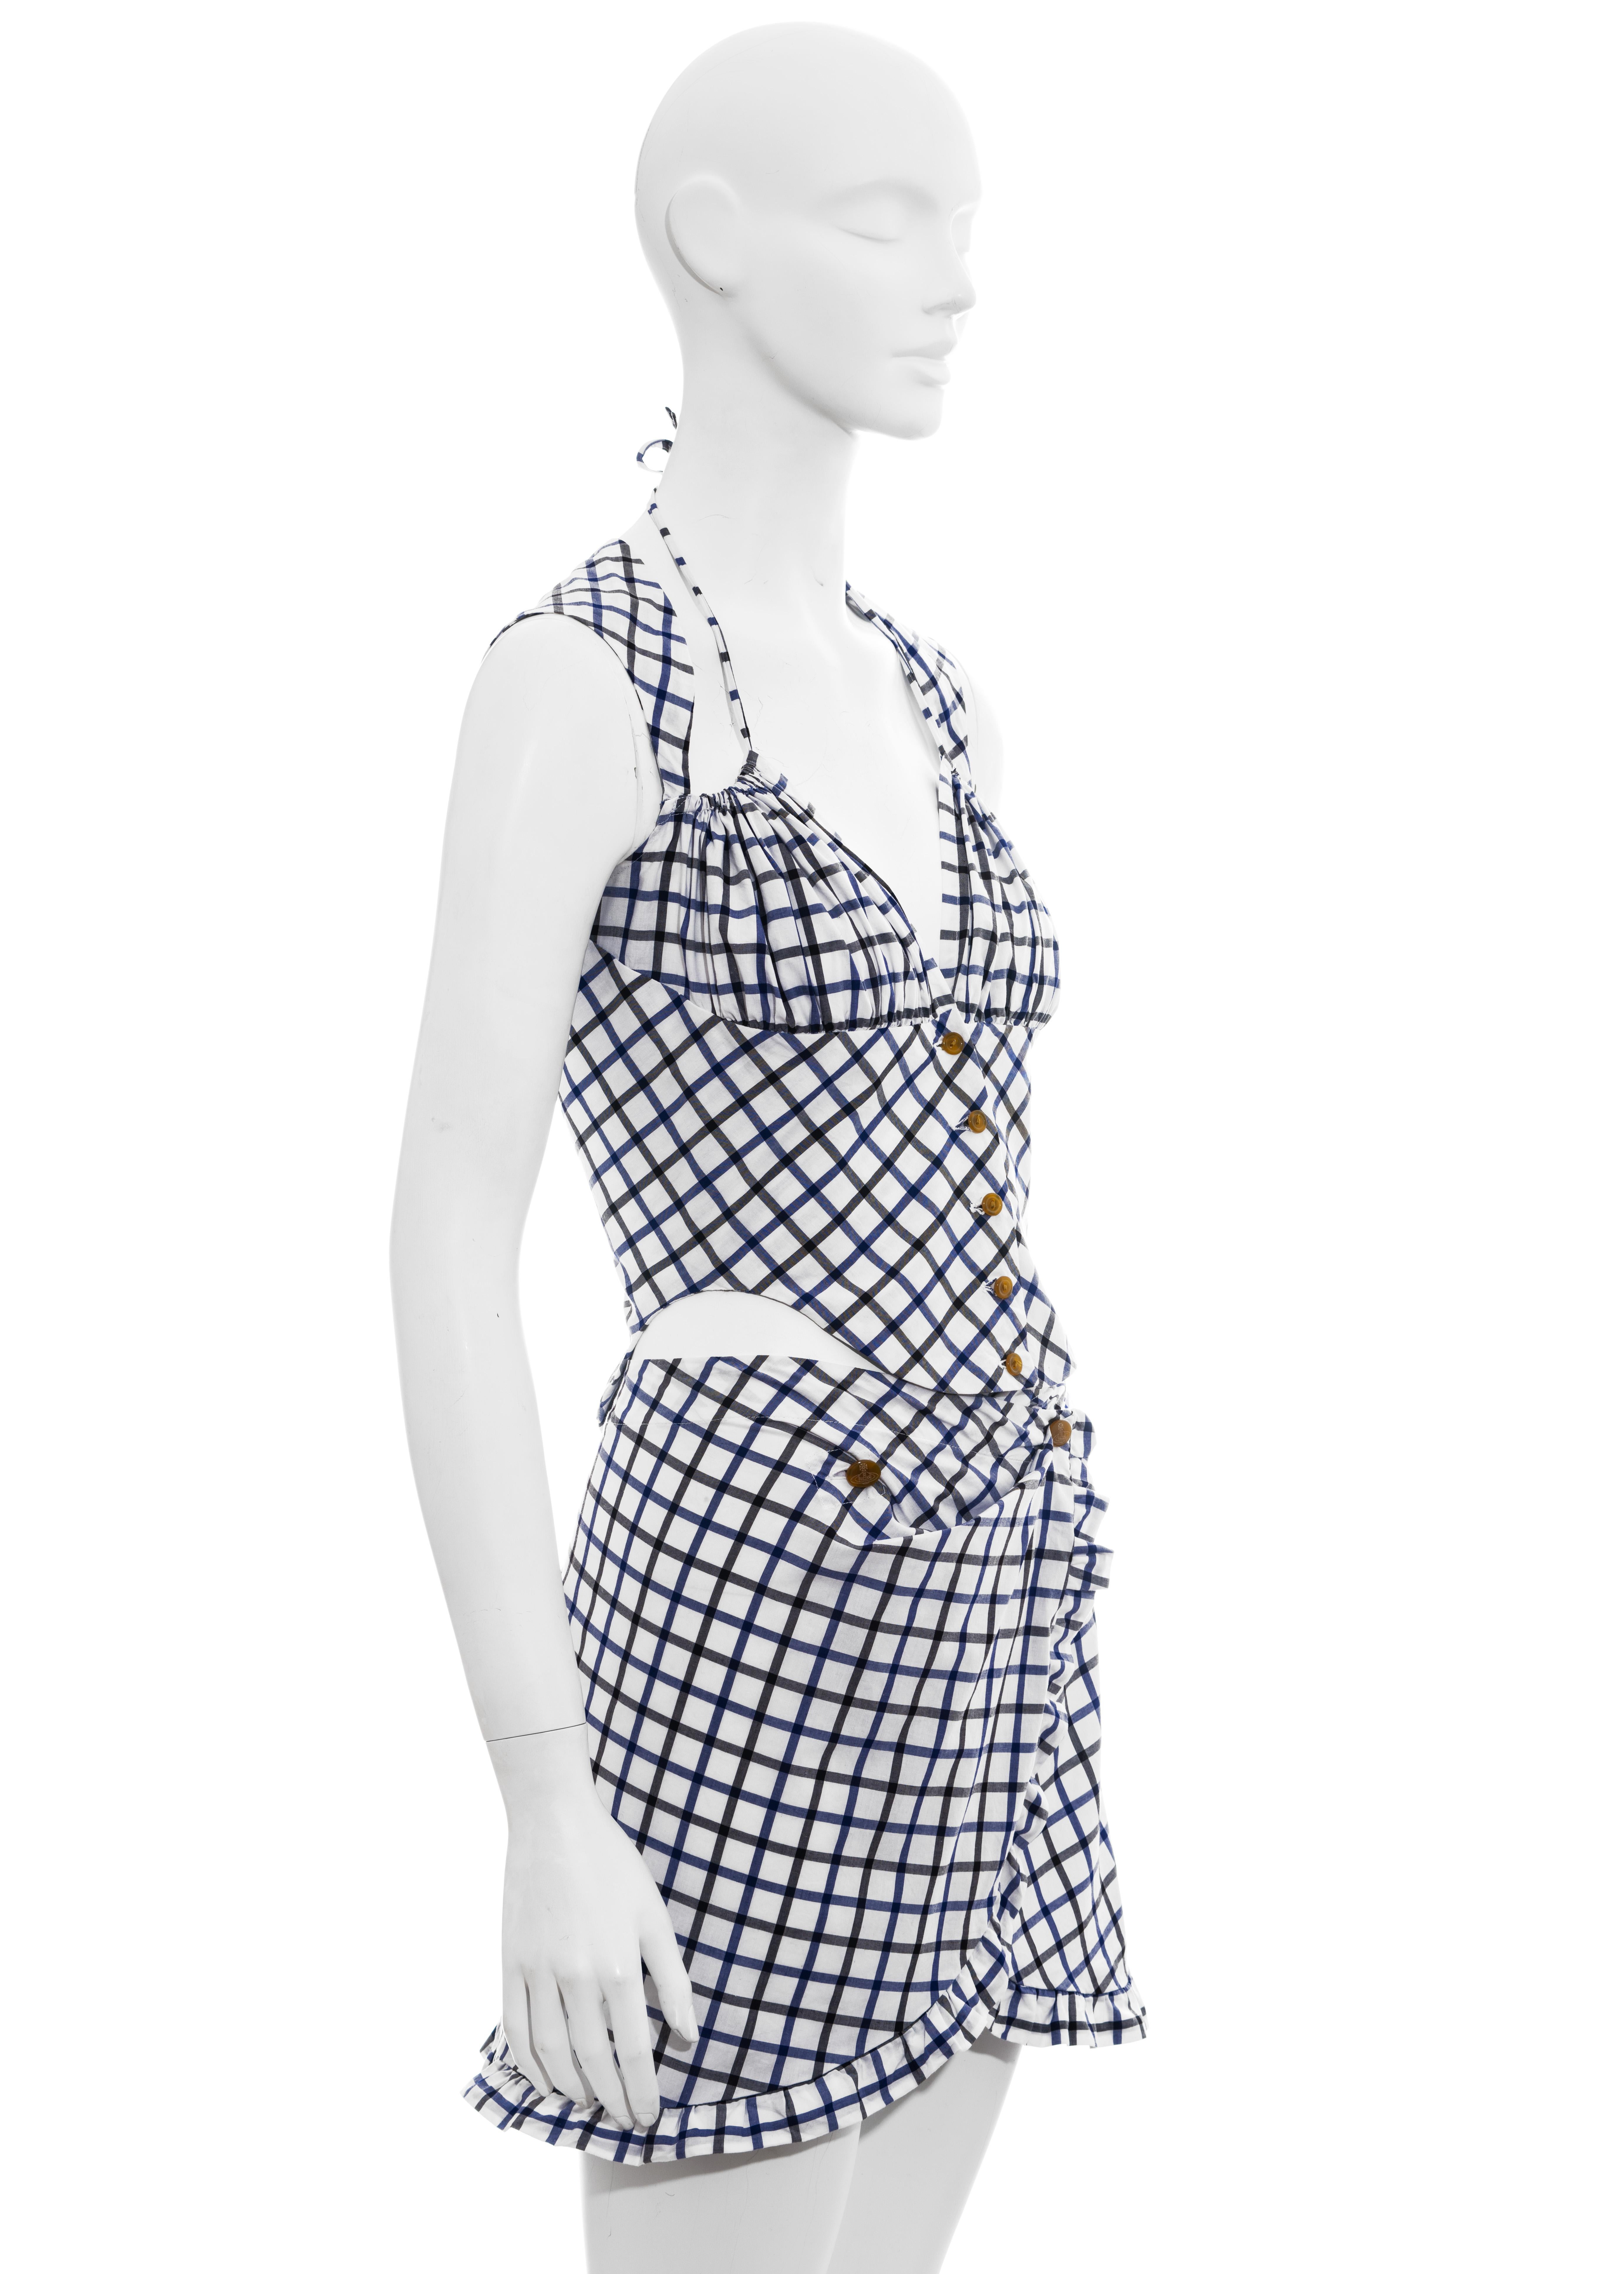 Gray Vivienne Westwood blue and white checked cotton skirt suit, ss 1994